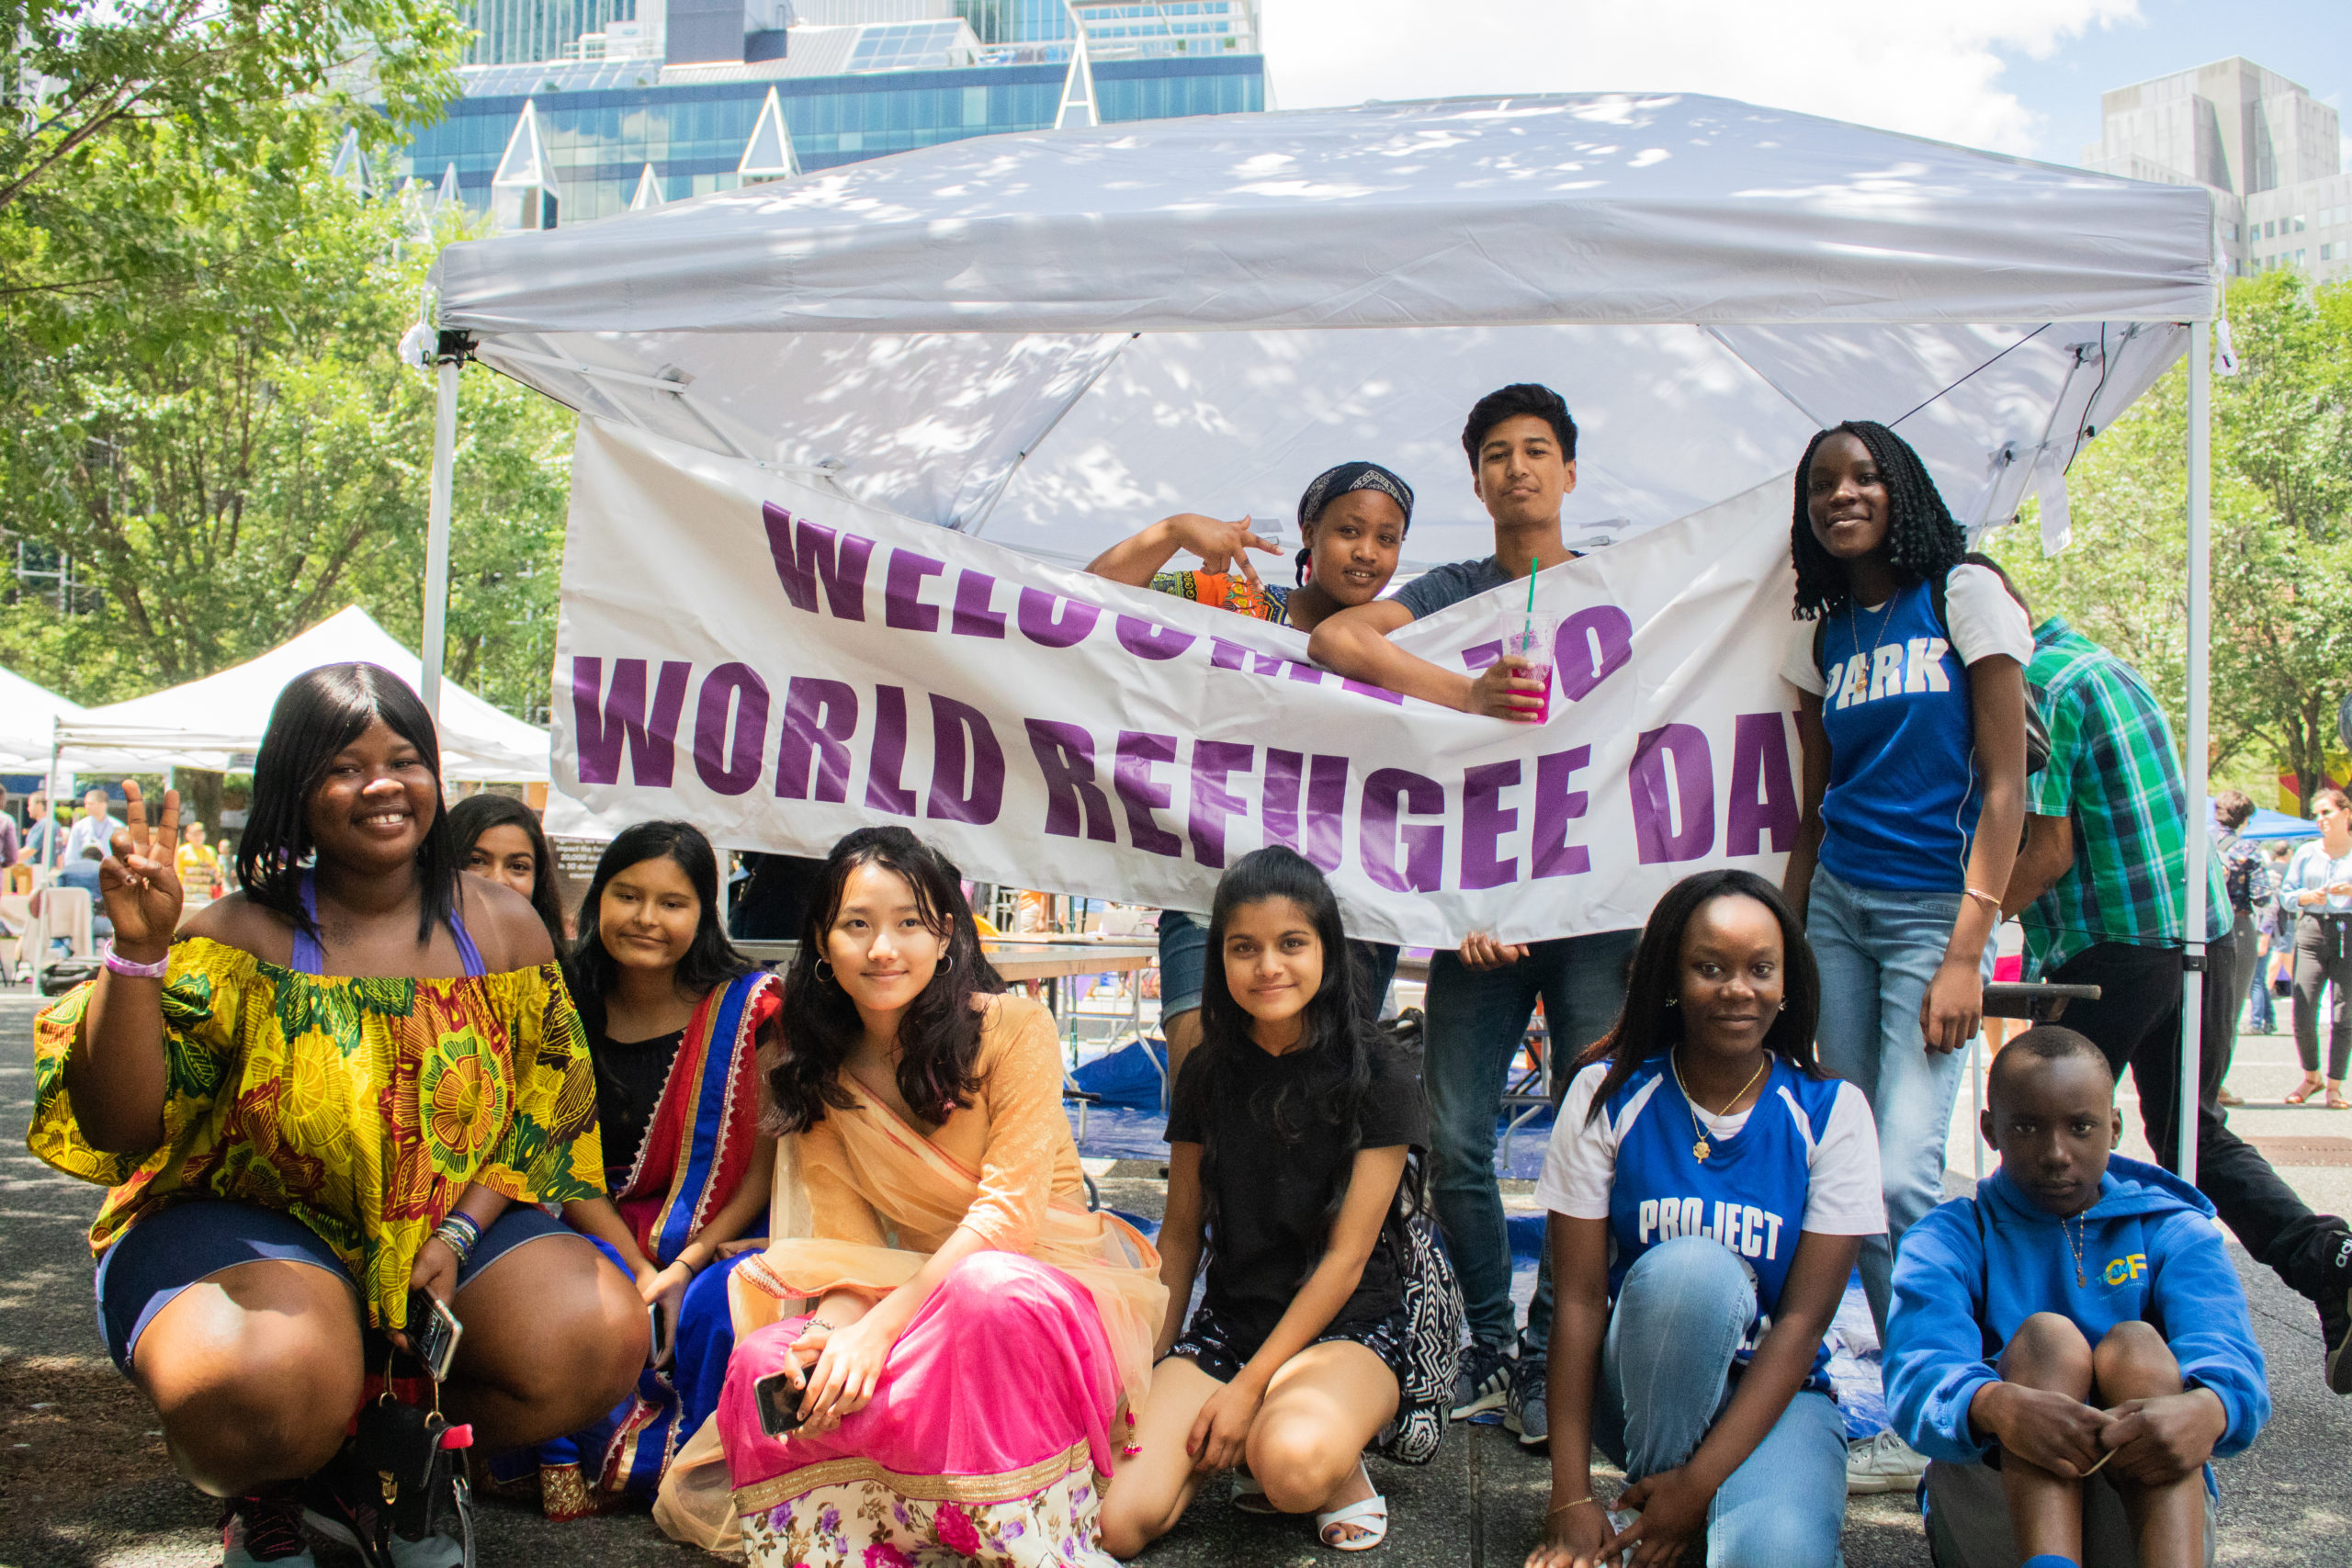 teens holding sign: Welcome to World Refugee Day